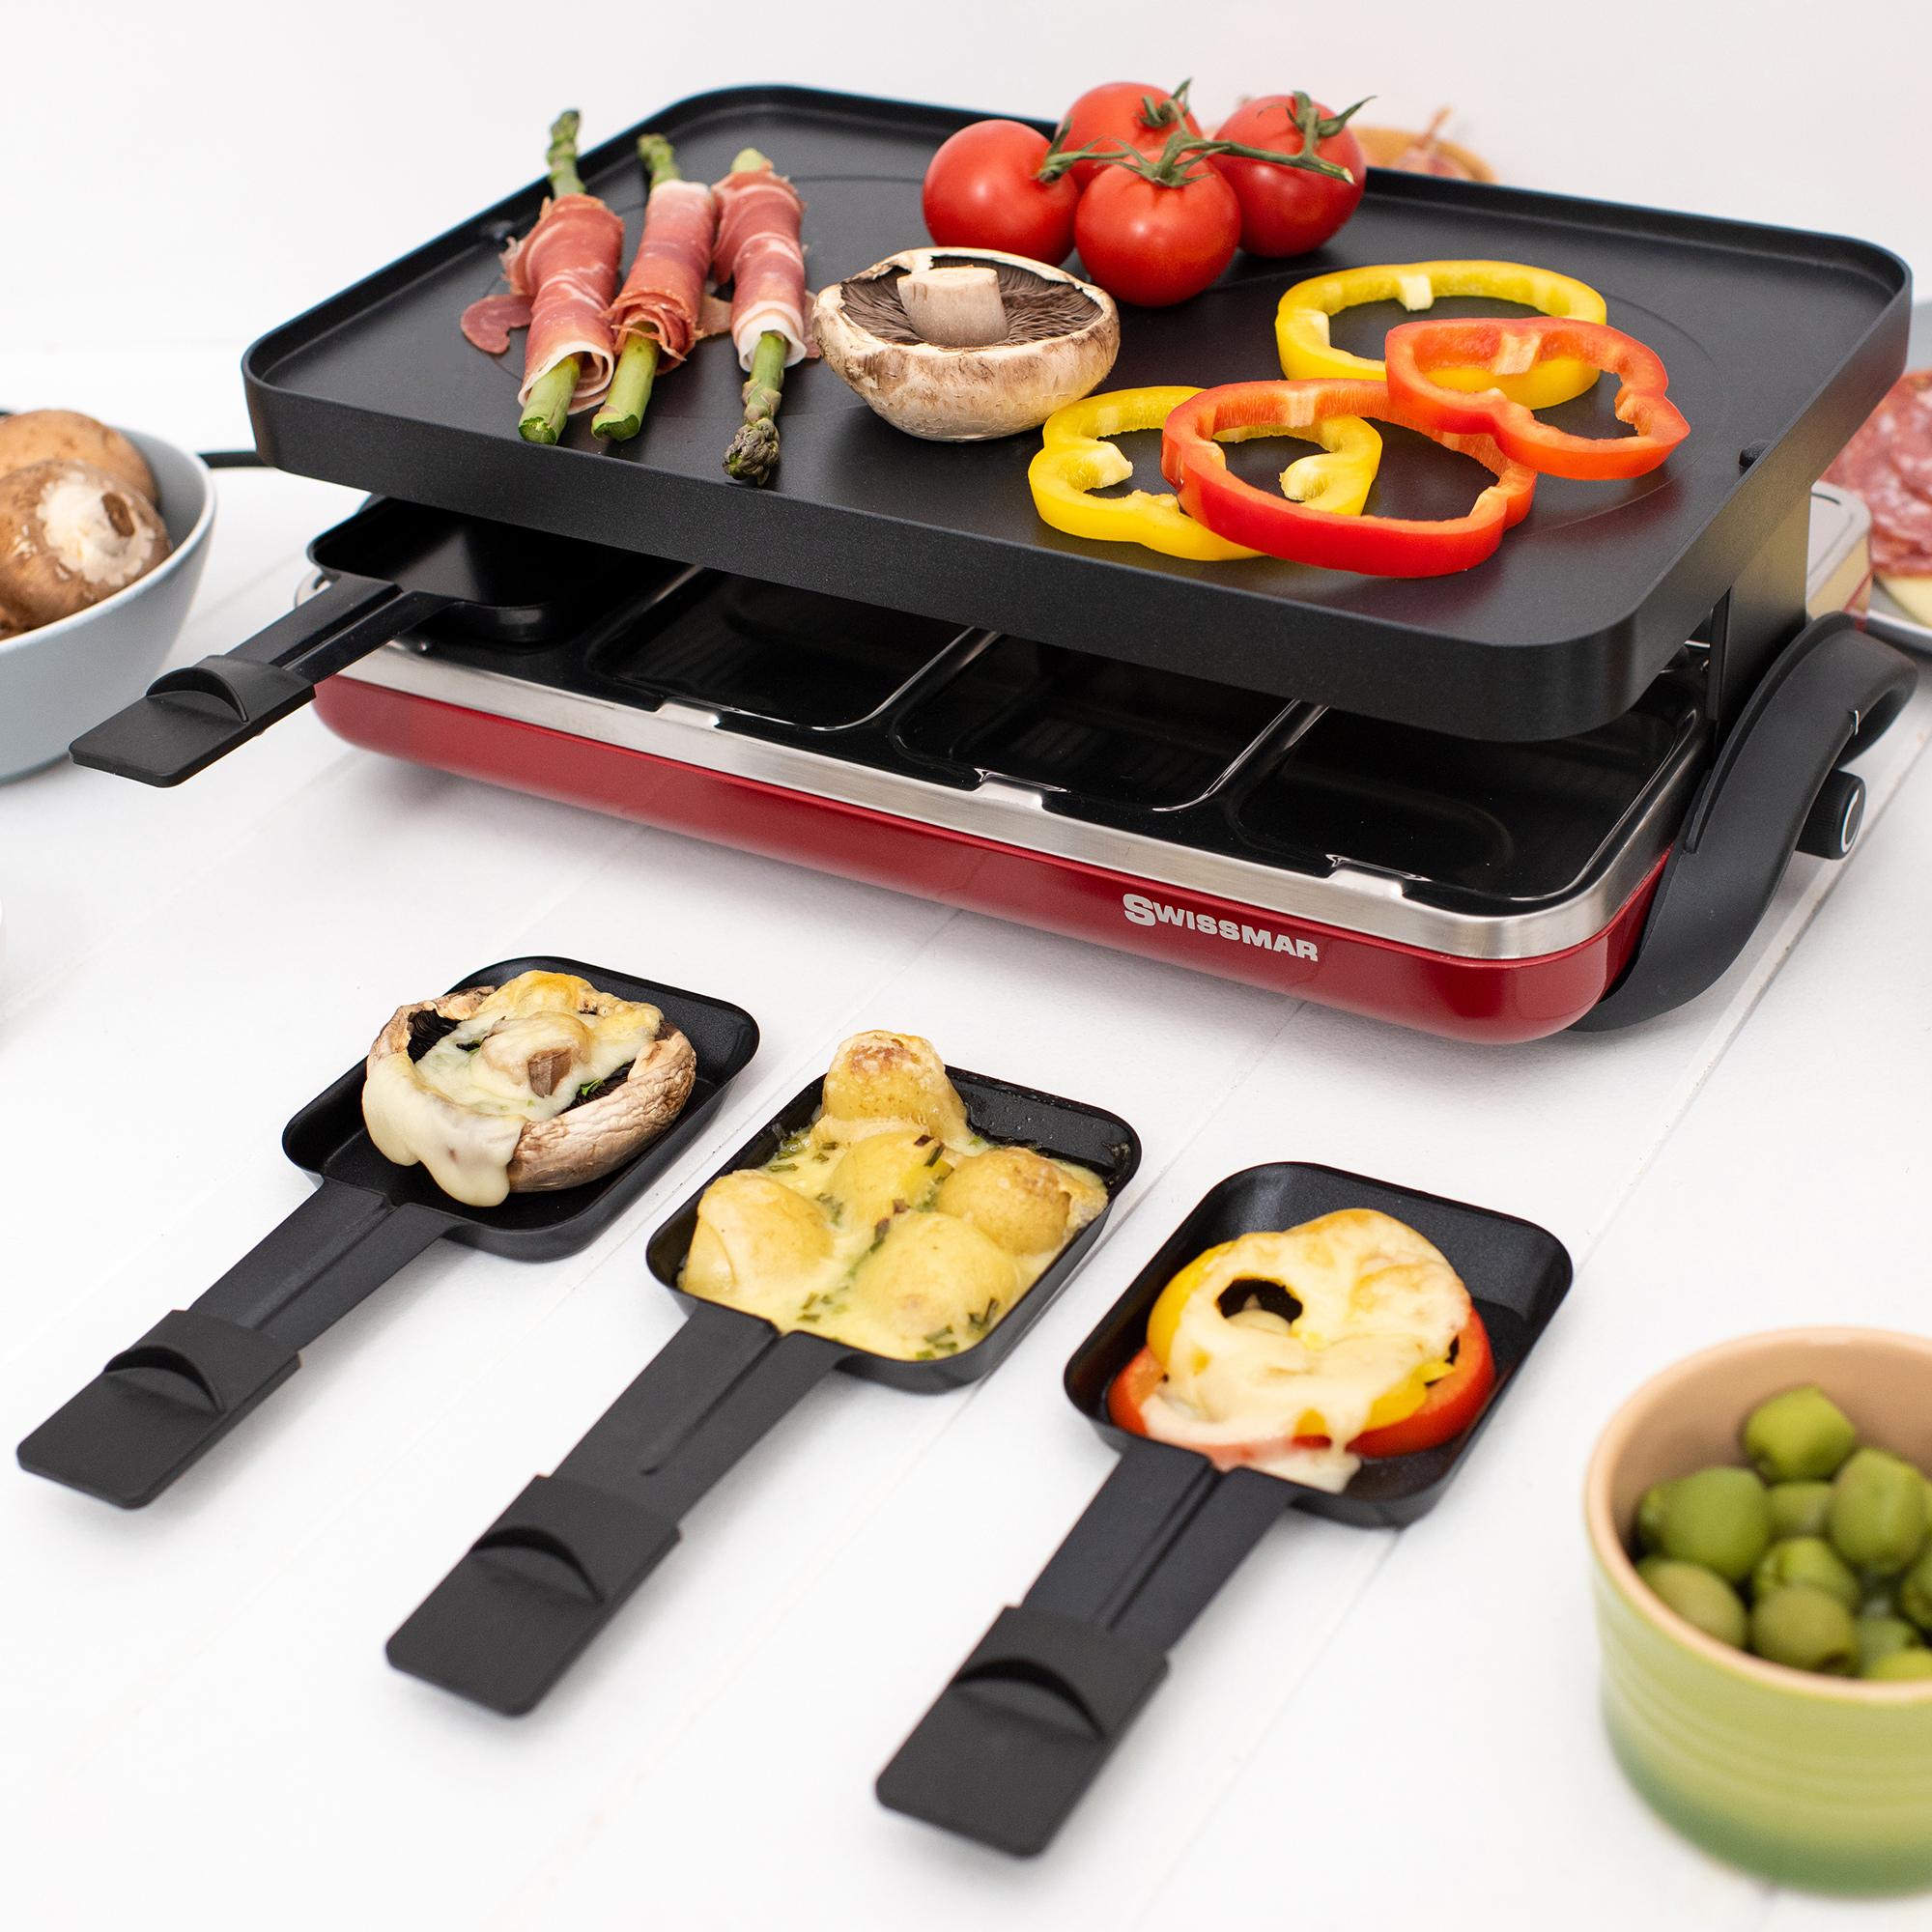 Swissmar Valais 8 Person Raclette Party Grill Red Image 5